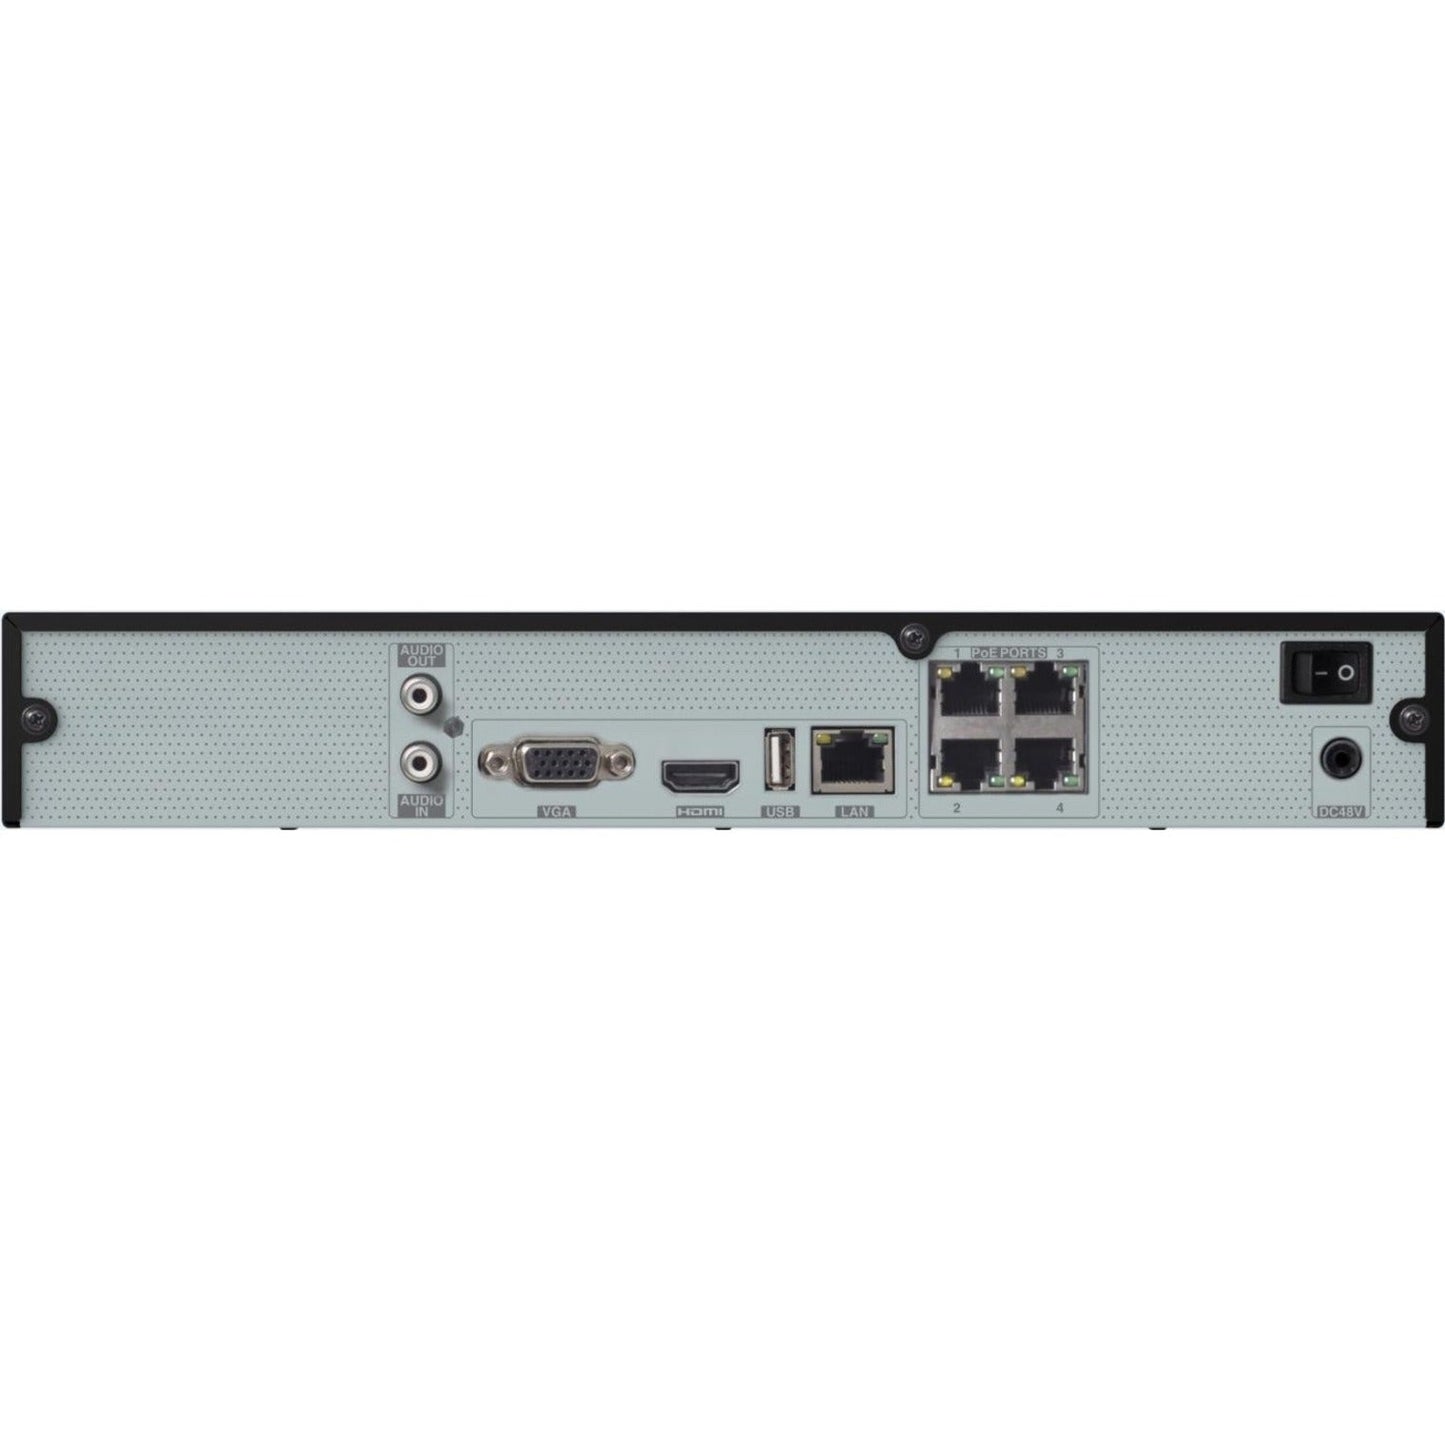 Speco 4 Channel NVR with 4 Built-In PoE Ports - 6 TB HDD